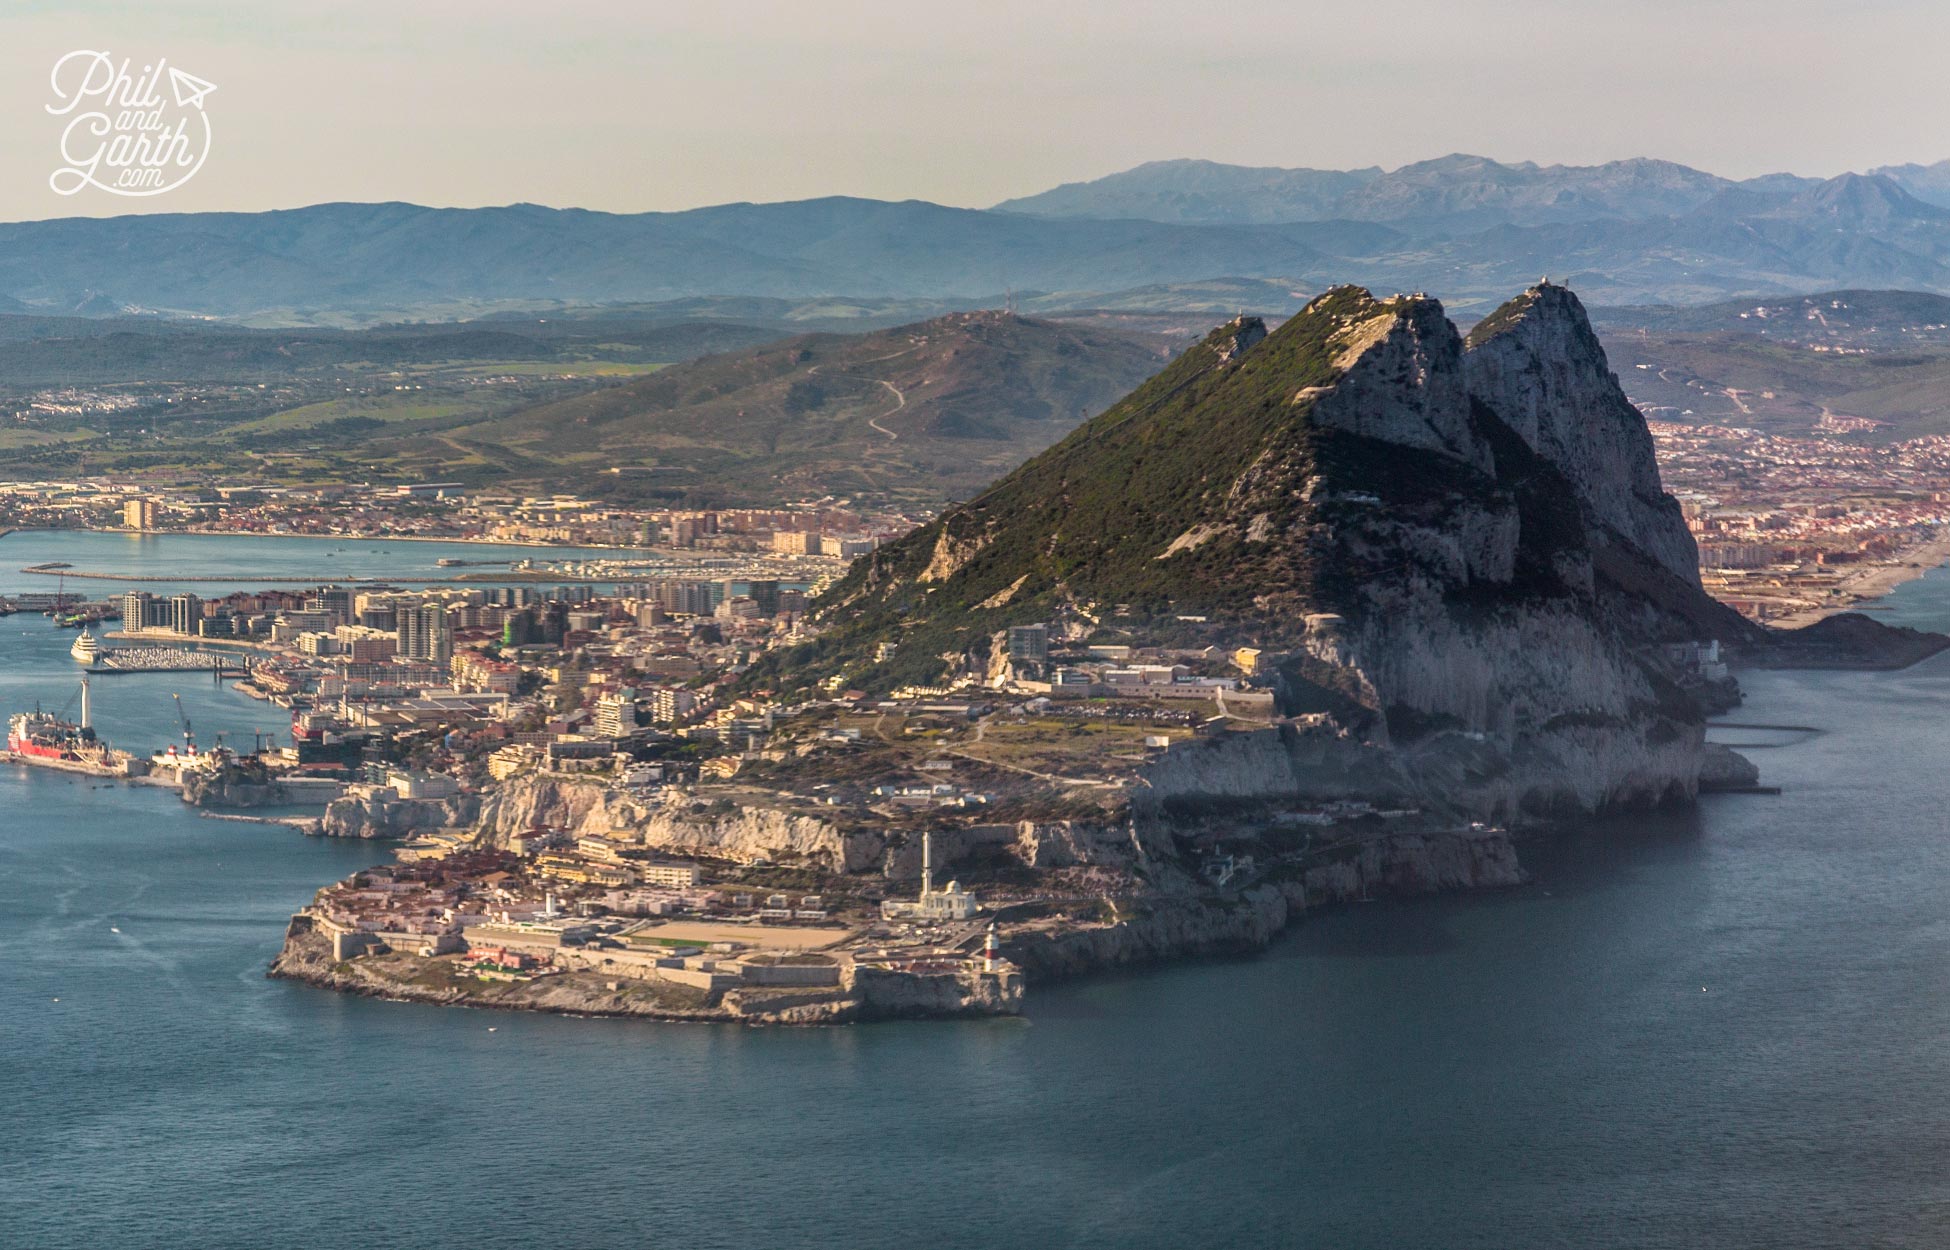 View of Gibraltar on the approach to the airport